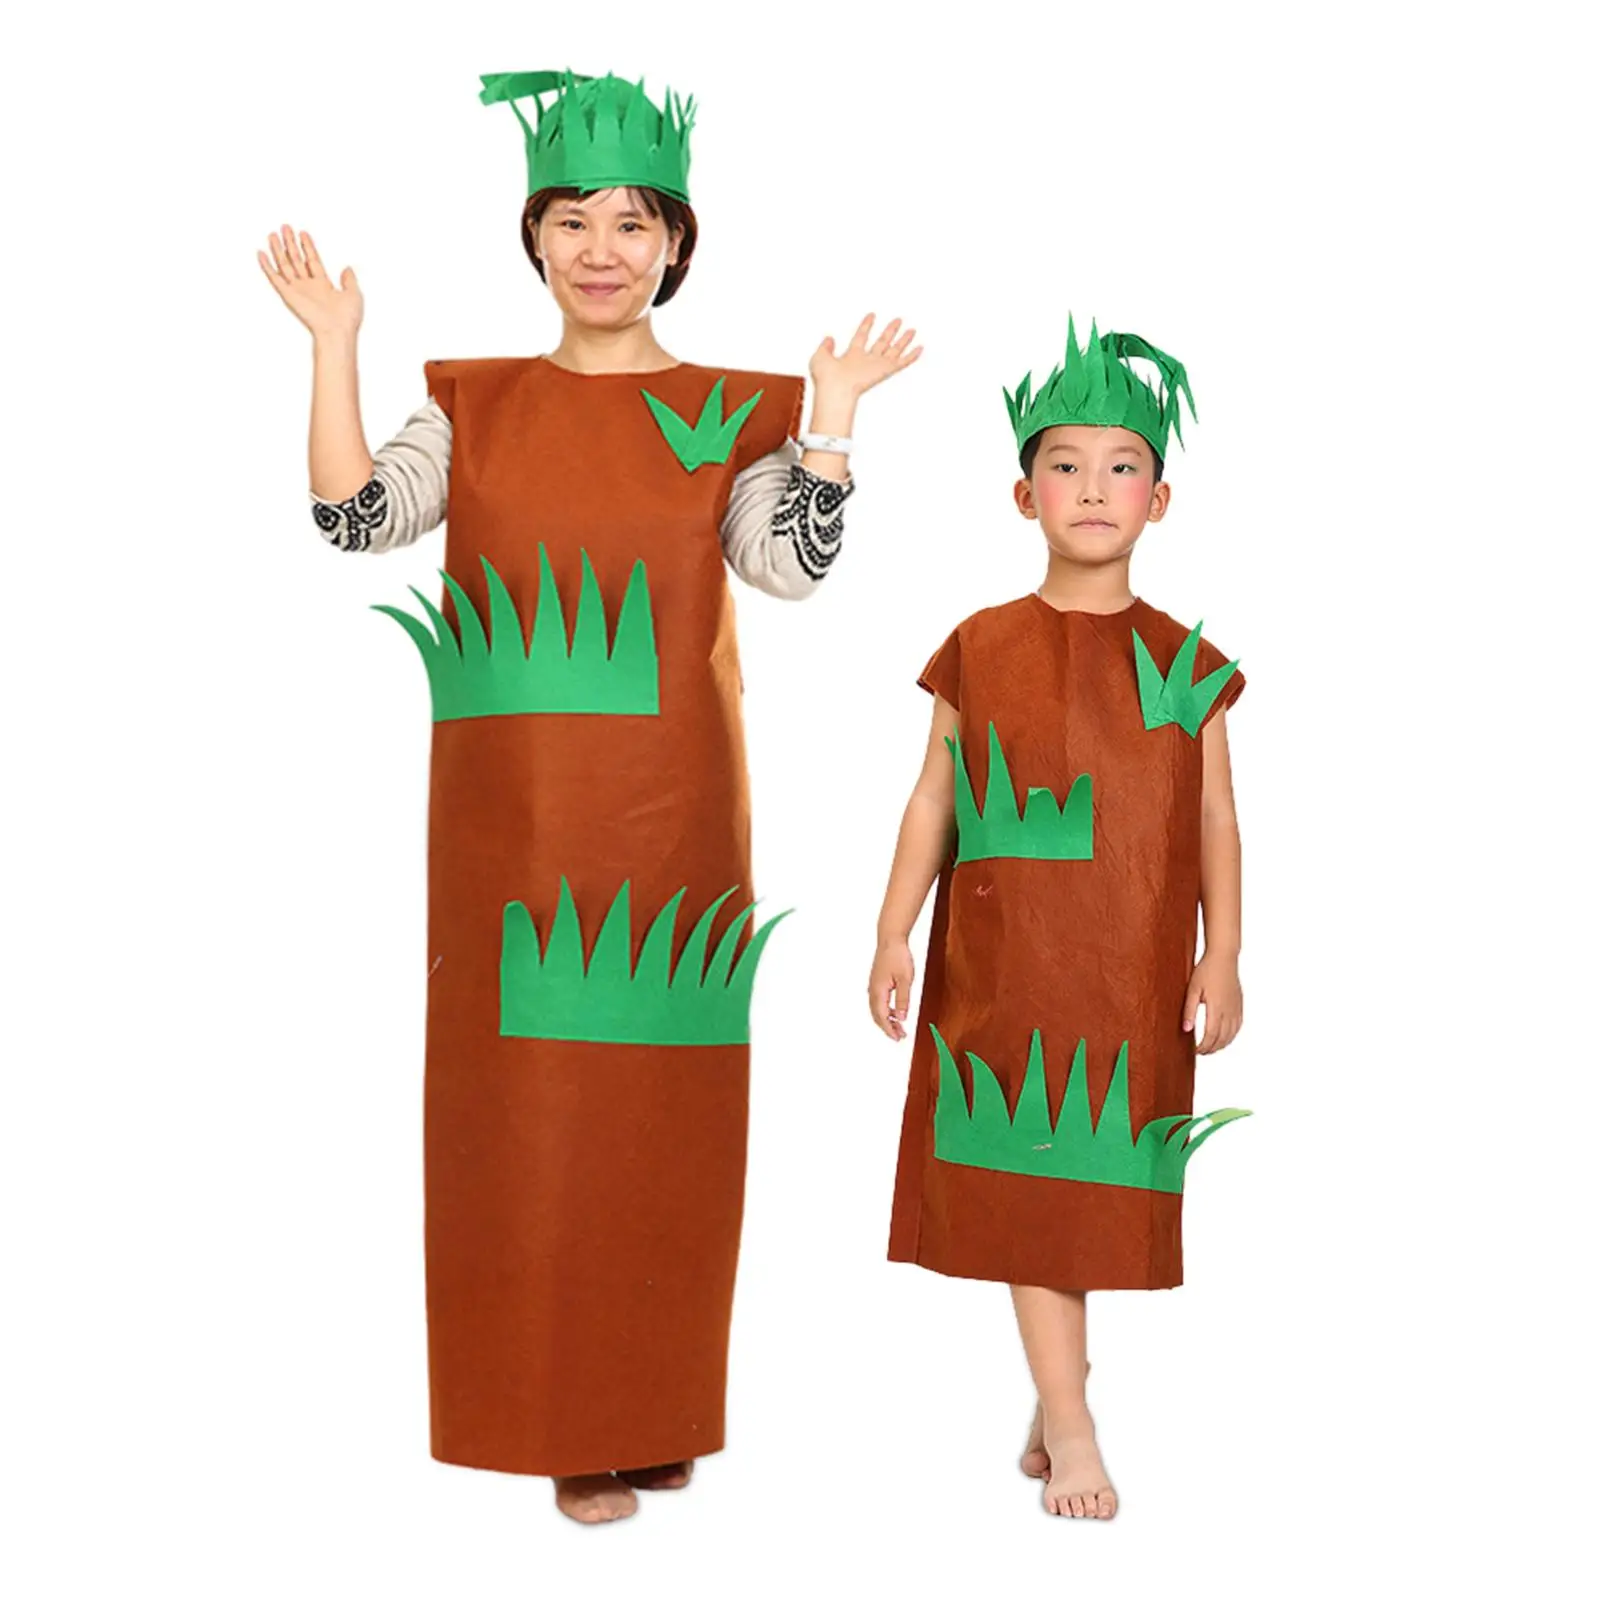 Grass Cosplay Costume Suit Headband Accessories Dress Fashion Show Outfit for Stage Performance Eco Friendly Themed Party